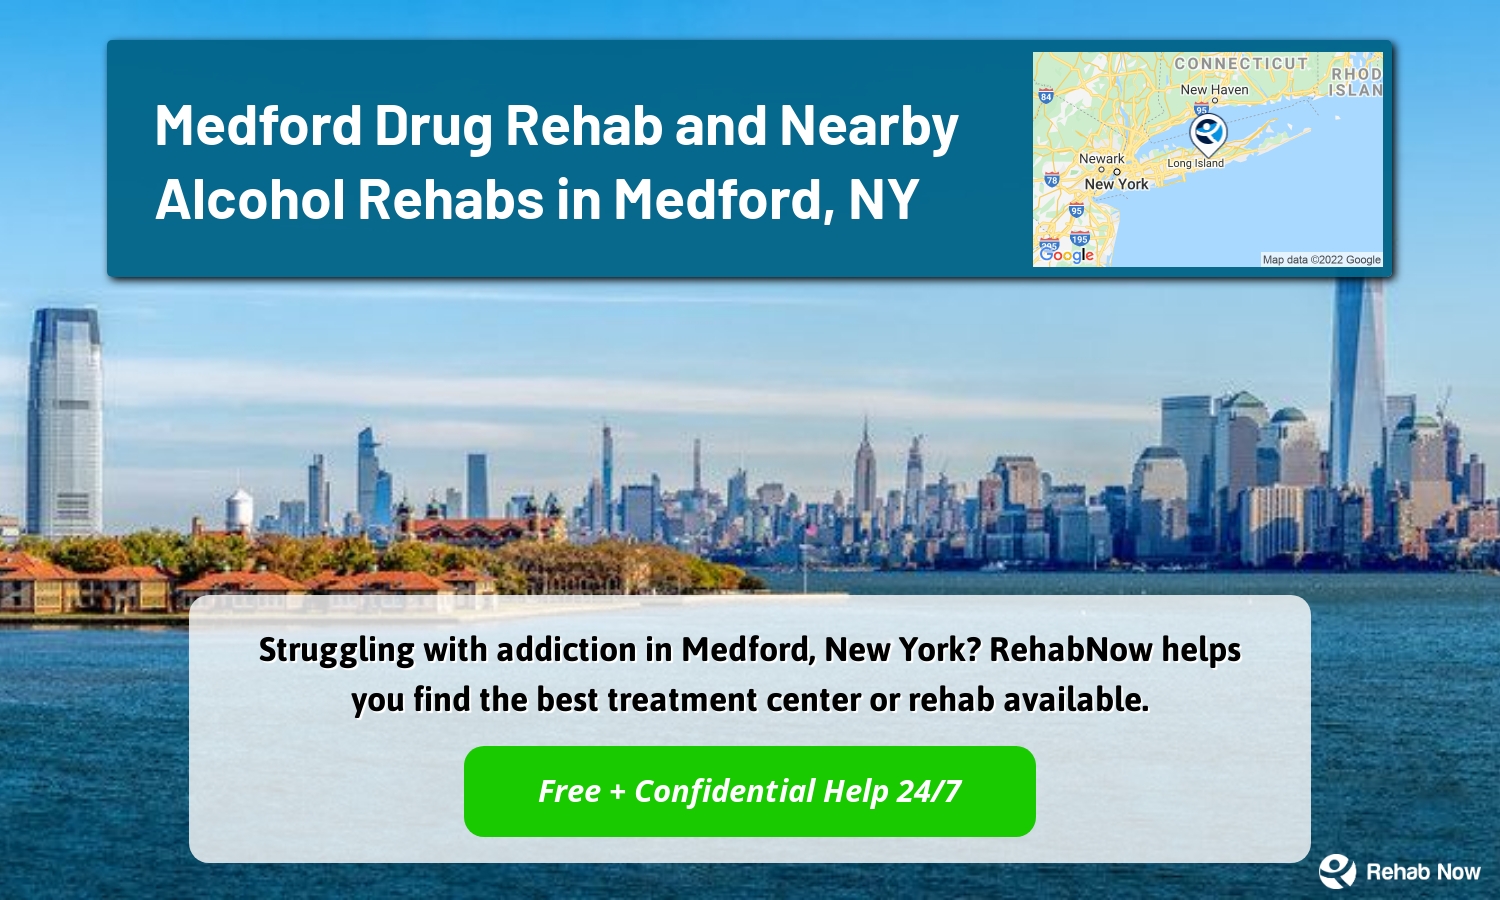 Struggling with addiction in Medford, New York? RehabNow helps you find the best treatment center or rehab available.